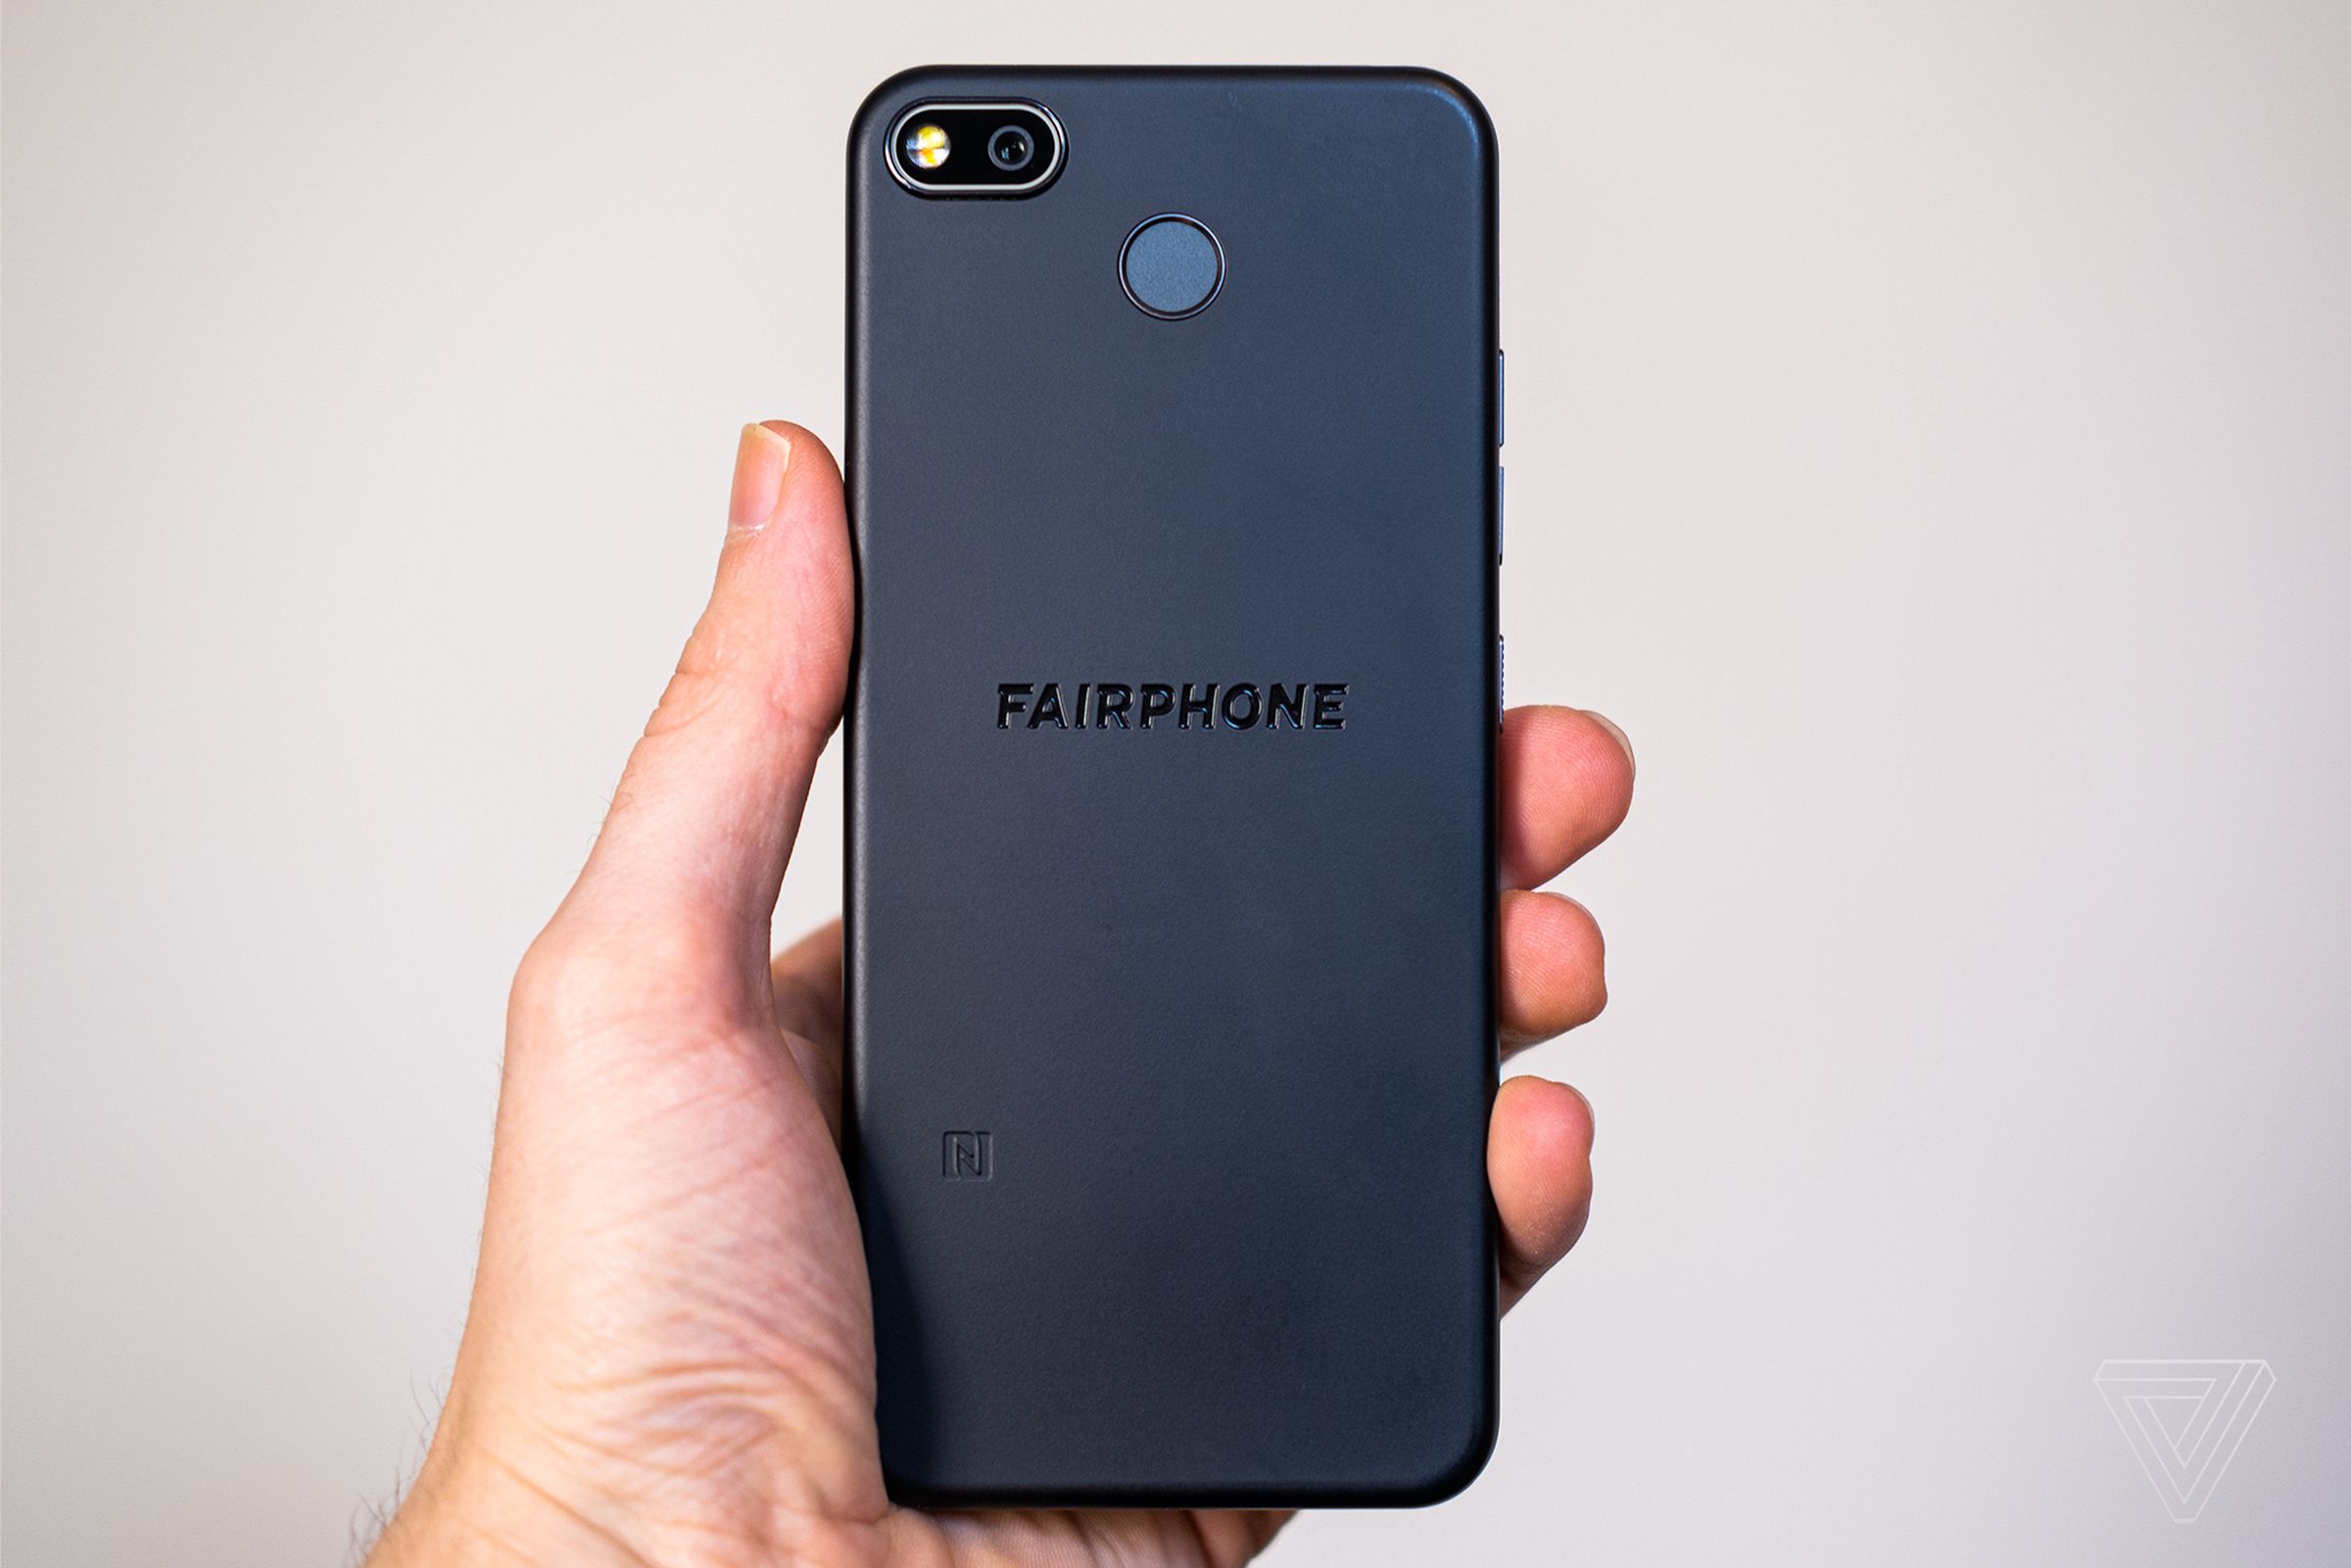 There’s a rear fingerprint sensor, but it’s uncomfortably high up.